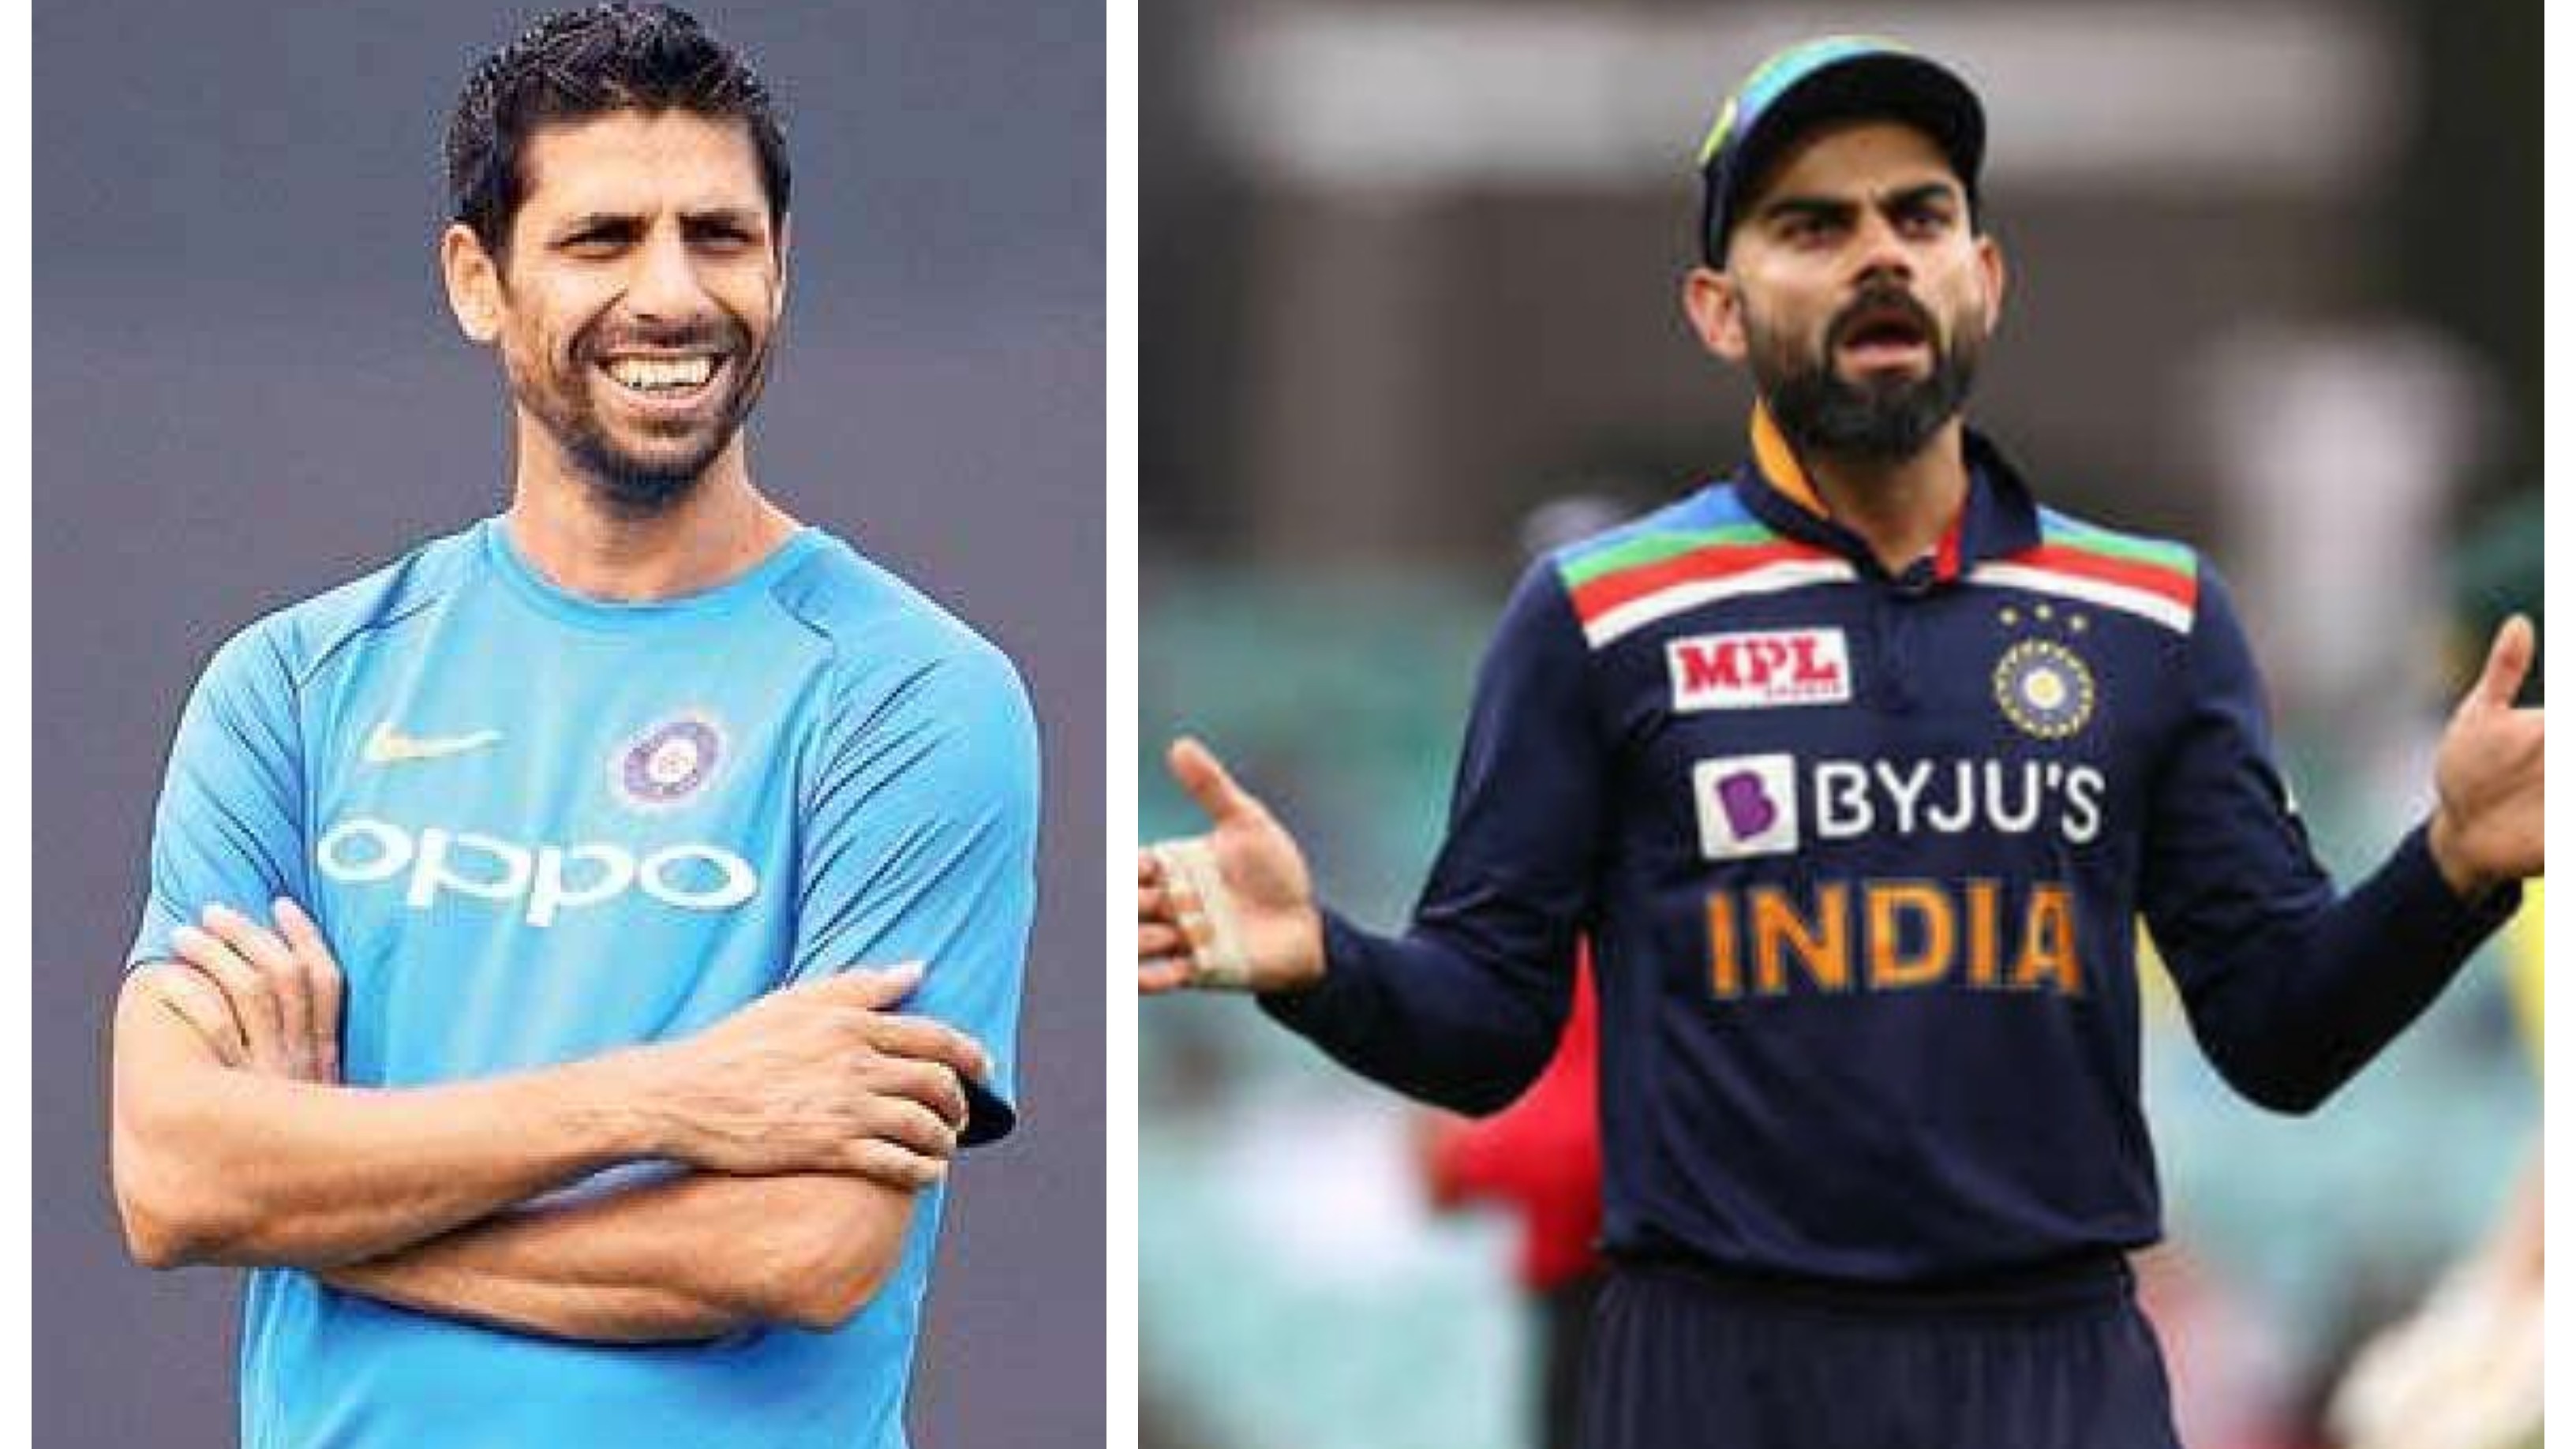 AUS v IND 2020-21: Nehra terms Kohli as an ‘impulsive captain’ for changing bowlers frequently in 2nd ODI